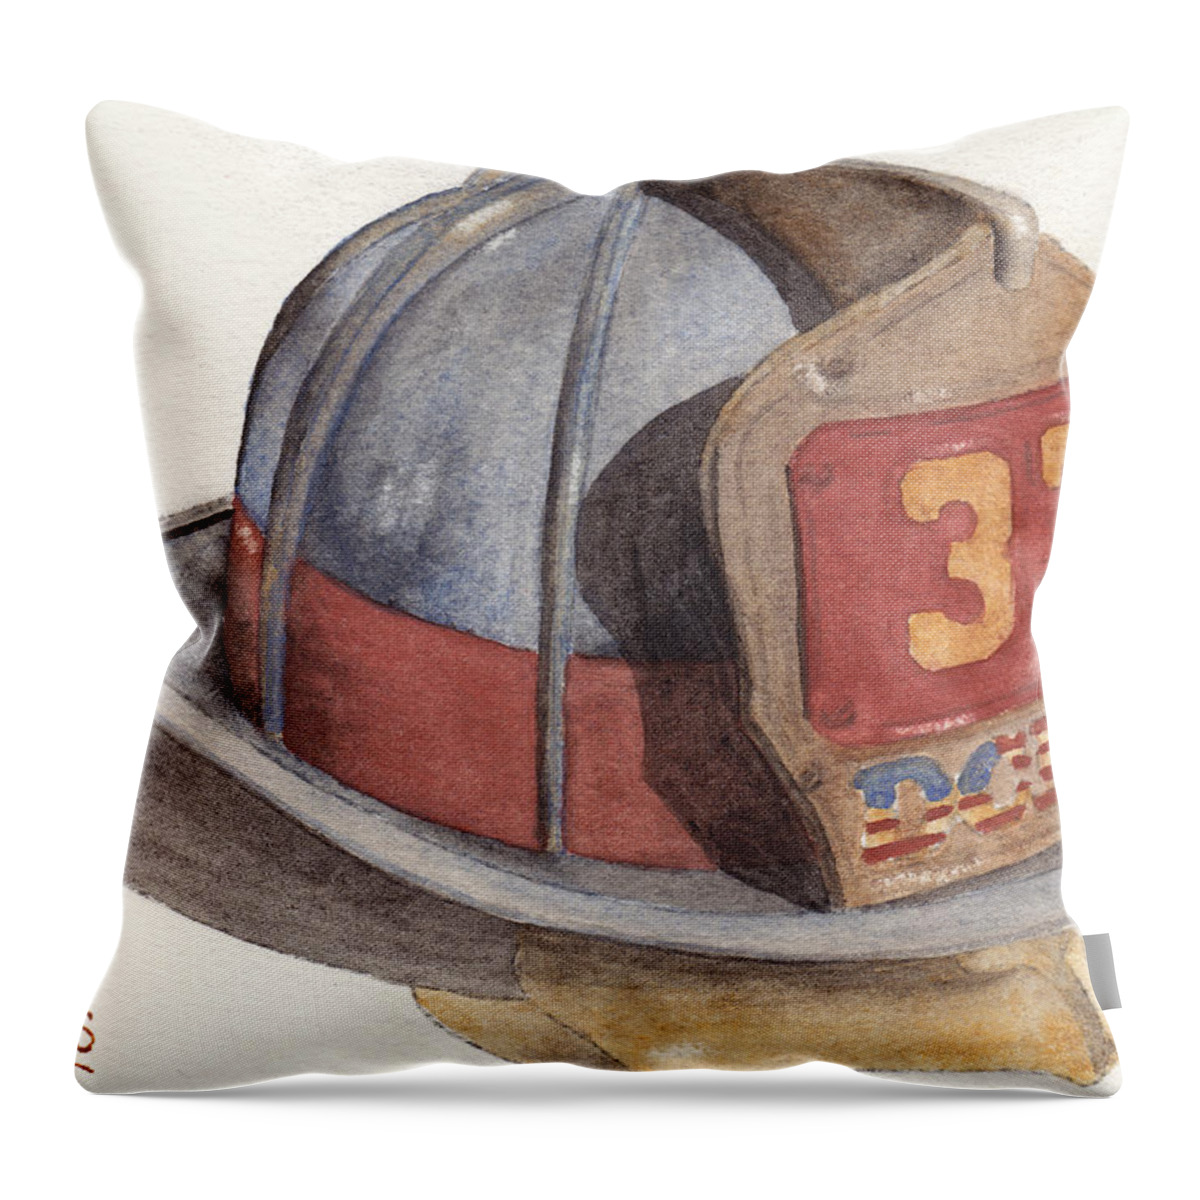 Fire Throw Pillow featuring the painting Firefighter Helmet With Melted Visor by Ken Powers